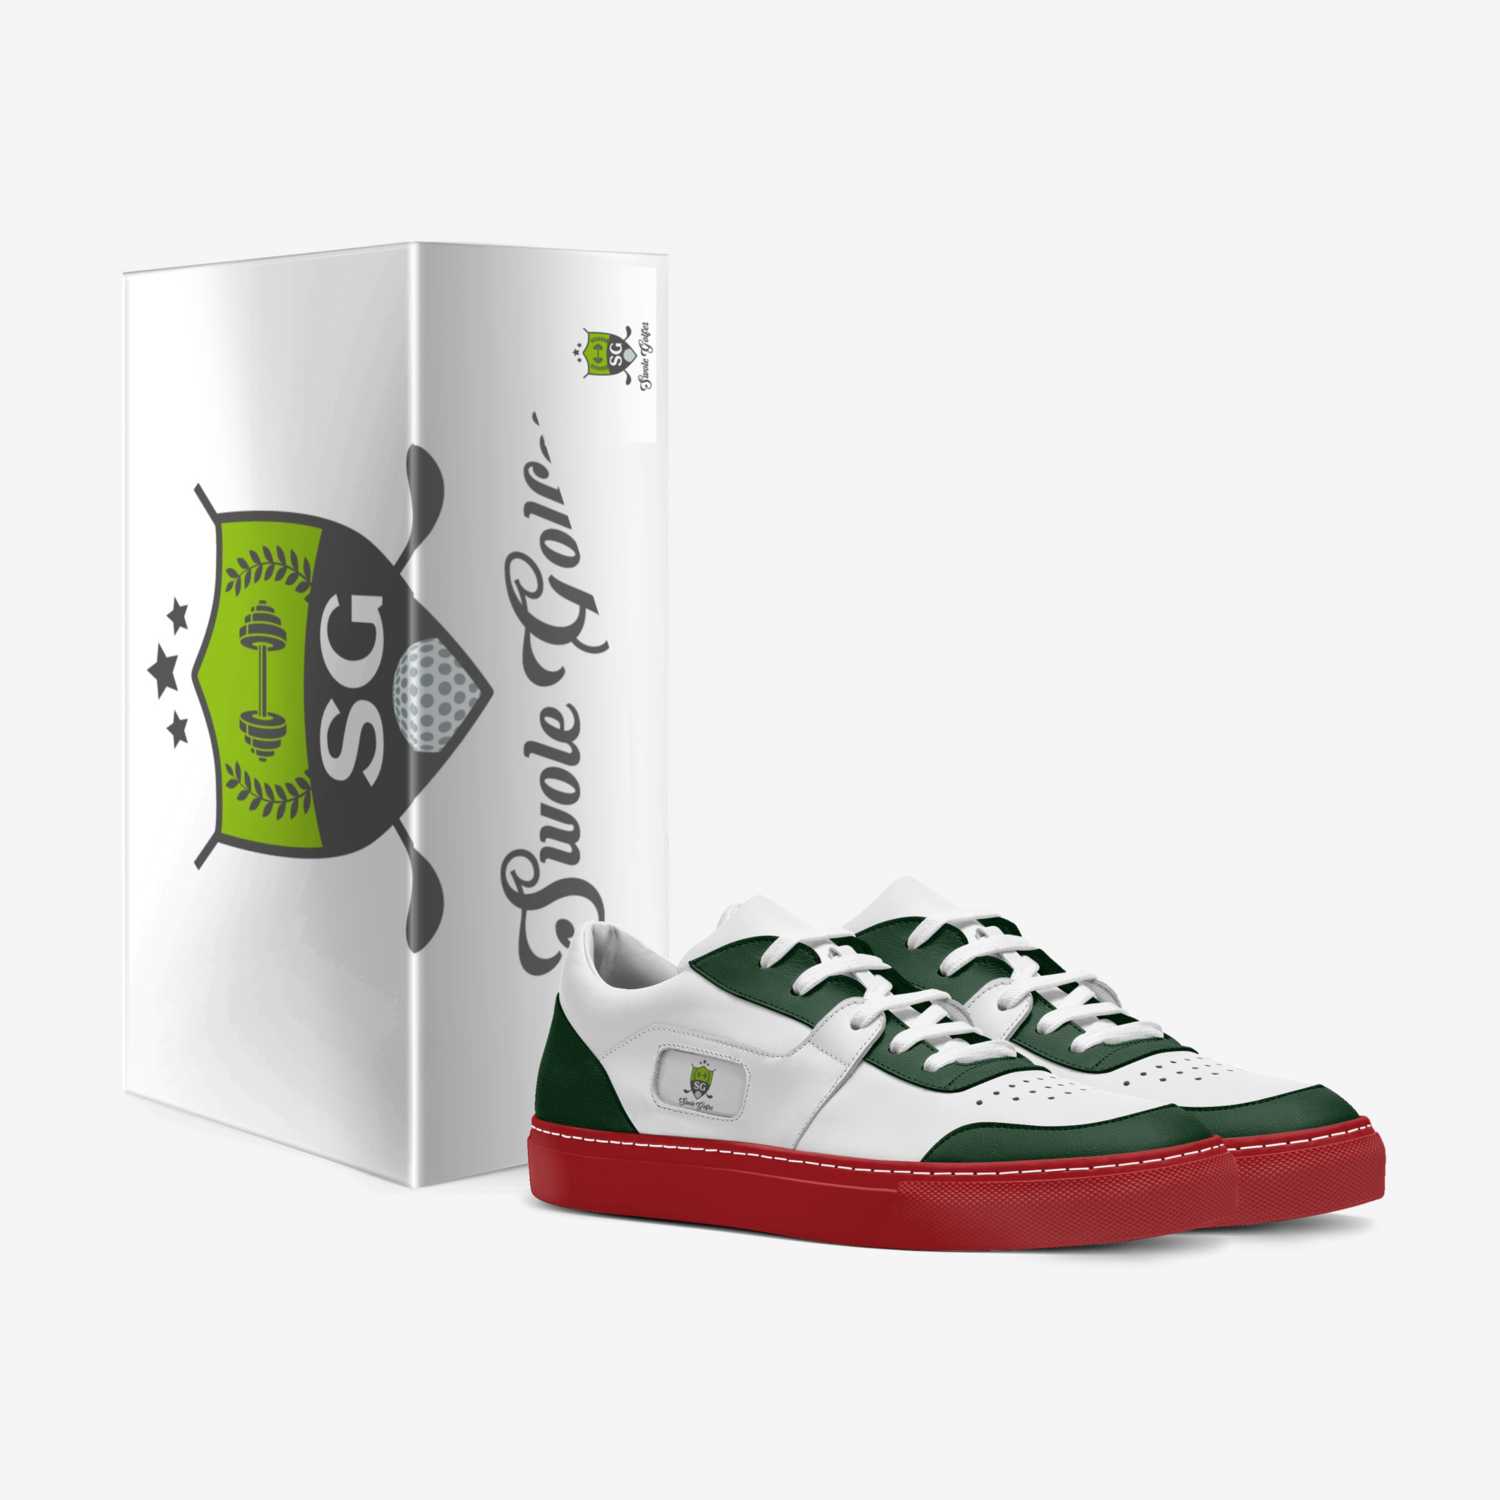 SG1 custom made in Italy shoes by Hector Ortiz | Box view